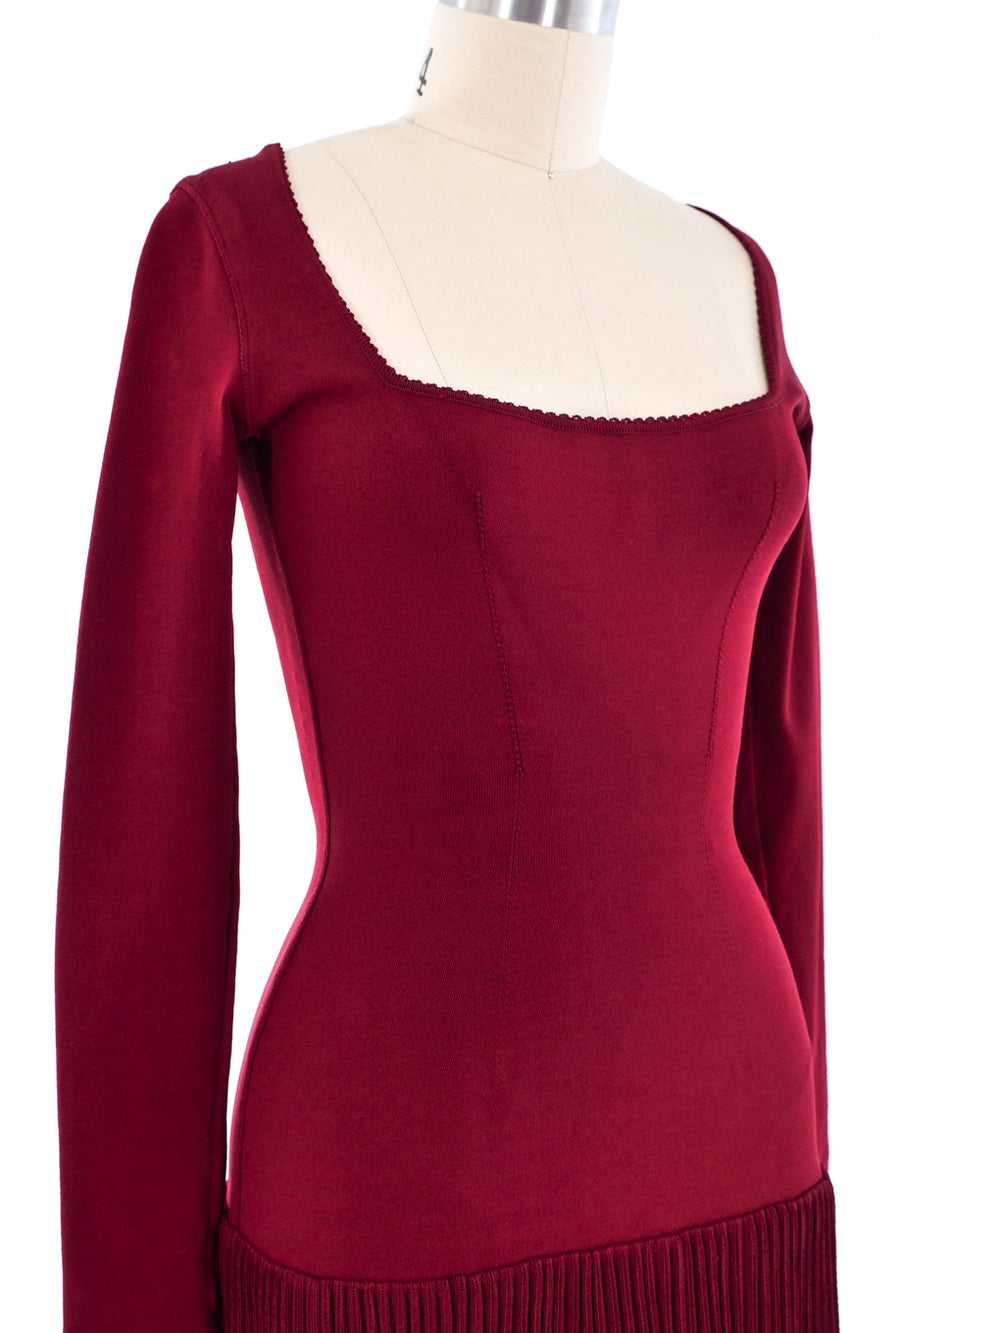 Alaia Cranberry Fit and Flare Ruffle Dress - image 4